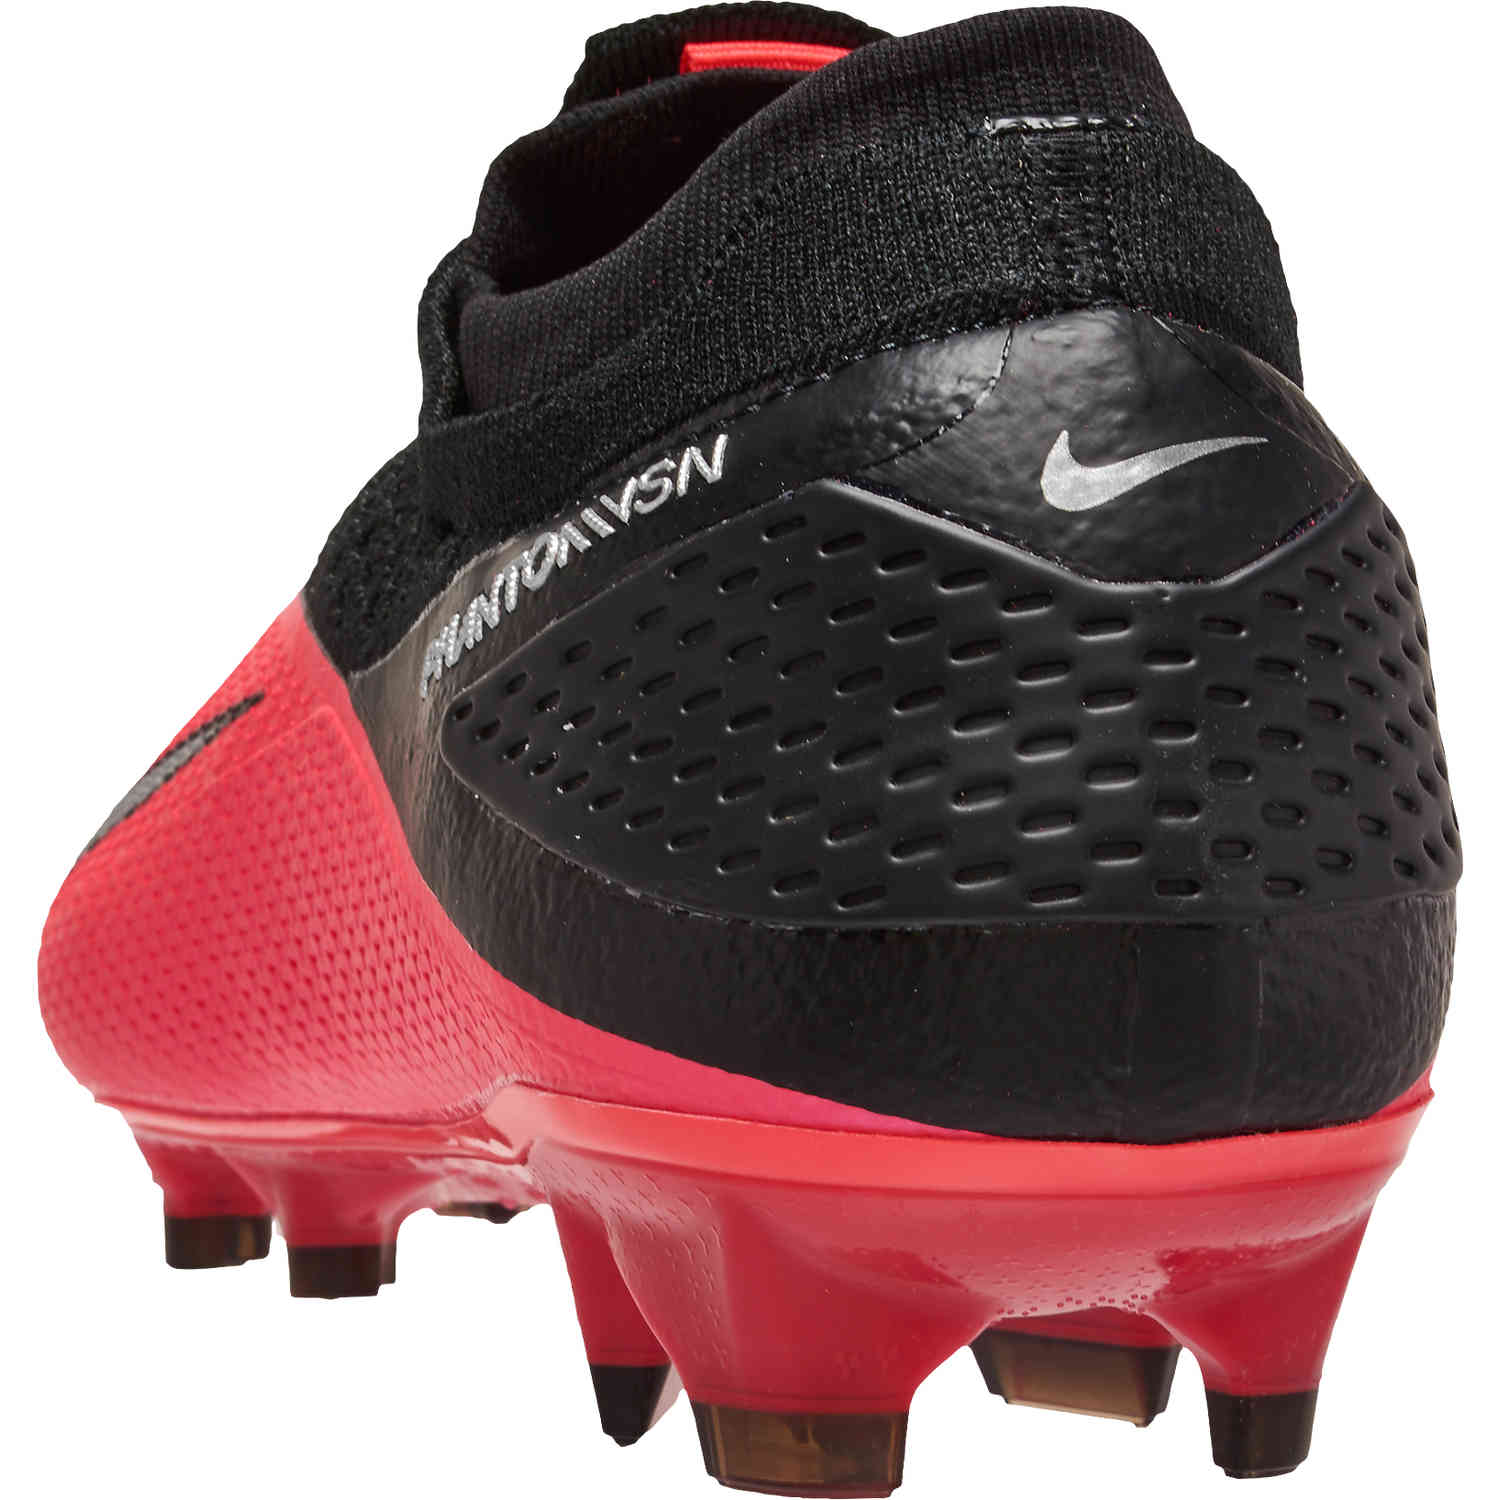 Details about   Phantom Vision 2 Elite Dynamic Fit MG/FG Gray Soccer Cleats CD4062-906 Size 5Y 